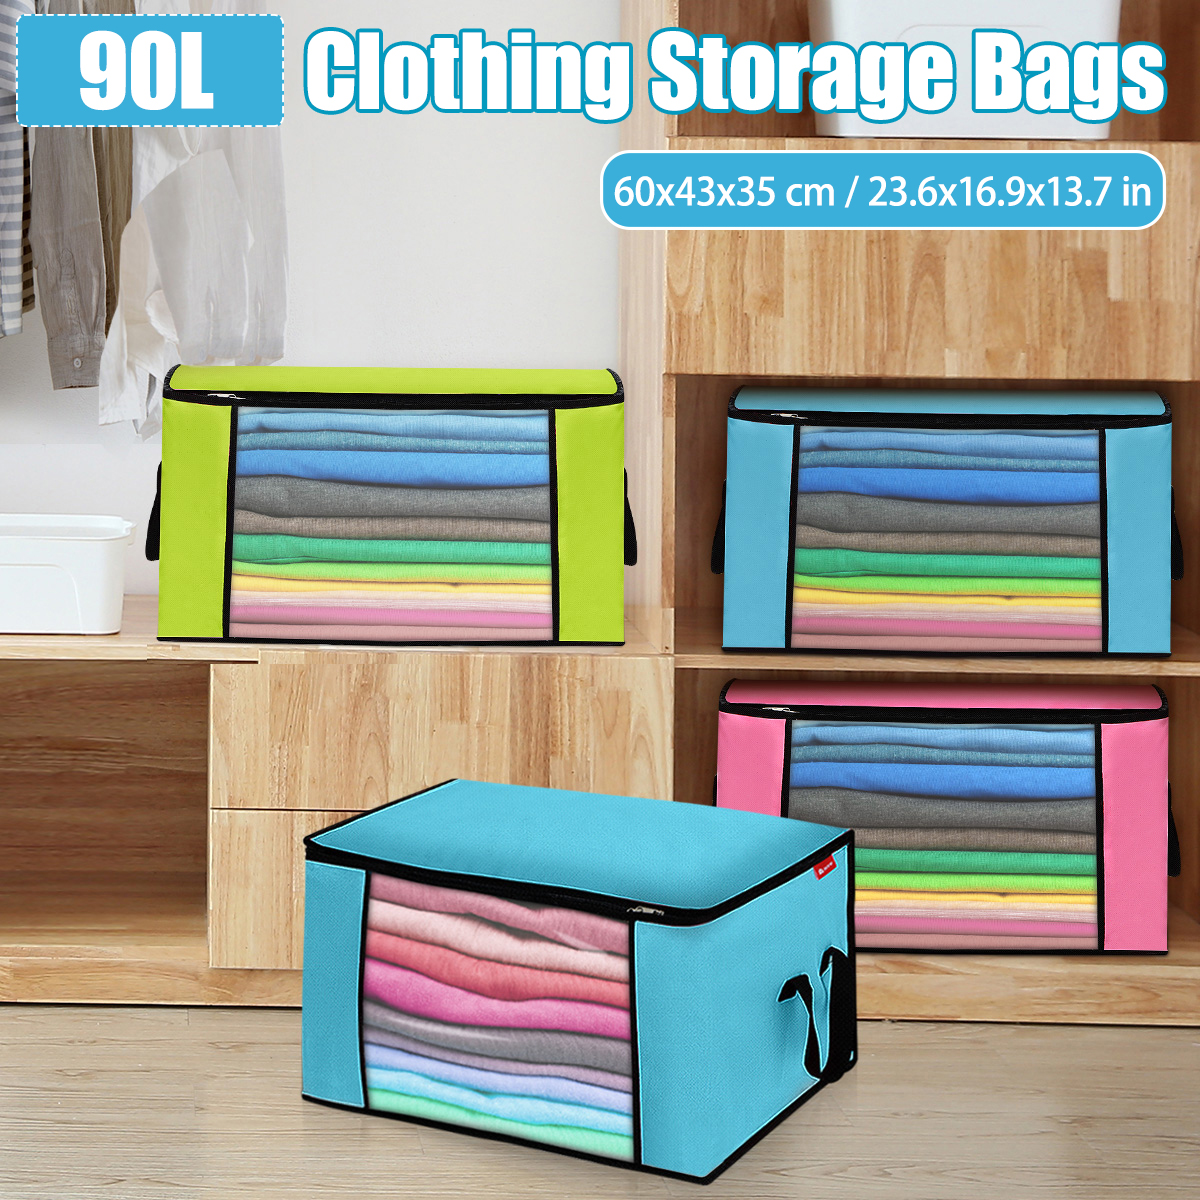 KING-DO-WAY-34-Pcs-90L-Clothing-Storage-Bags-Zipped-Clothes-Organizers-Quilts-Blankets-Bedding-Handb-1855896-1